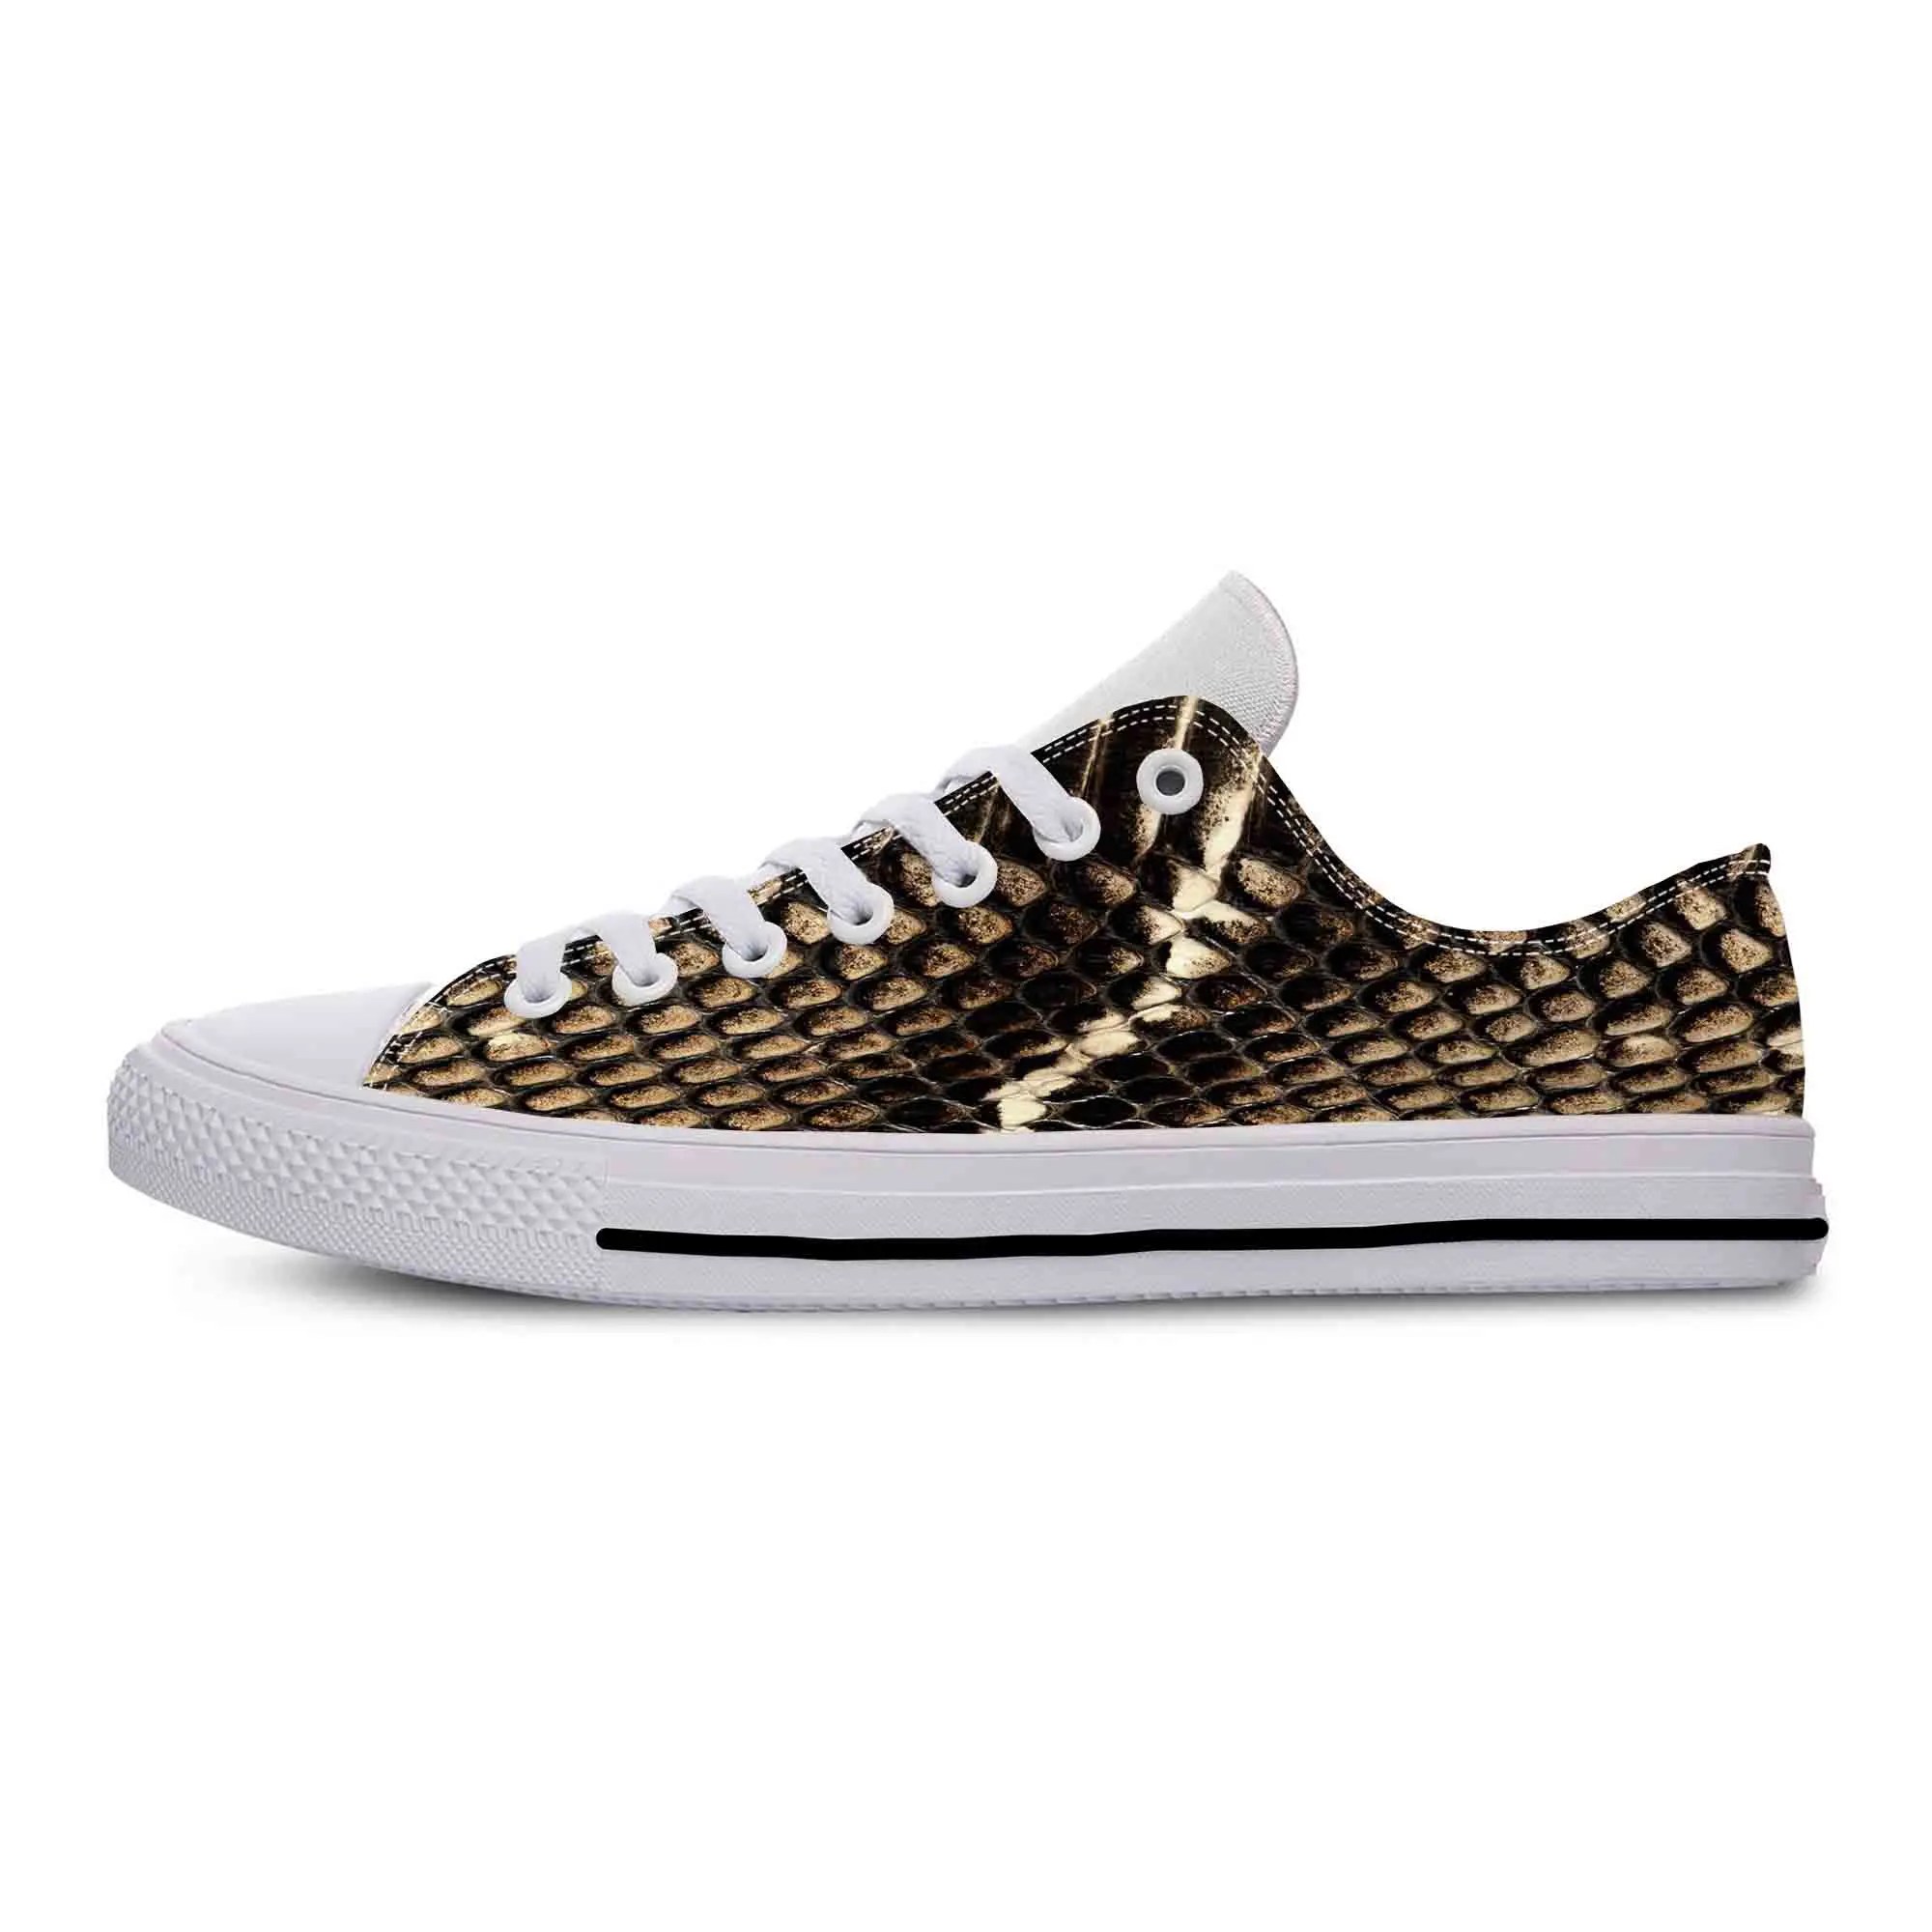 

Snake Skin Scales Snakeskin Pattern Fashion Funny Casual Cloth Shoes Low Top Comfortable Breathable 3D Print Men Women Sneakers